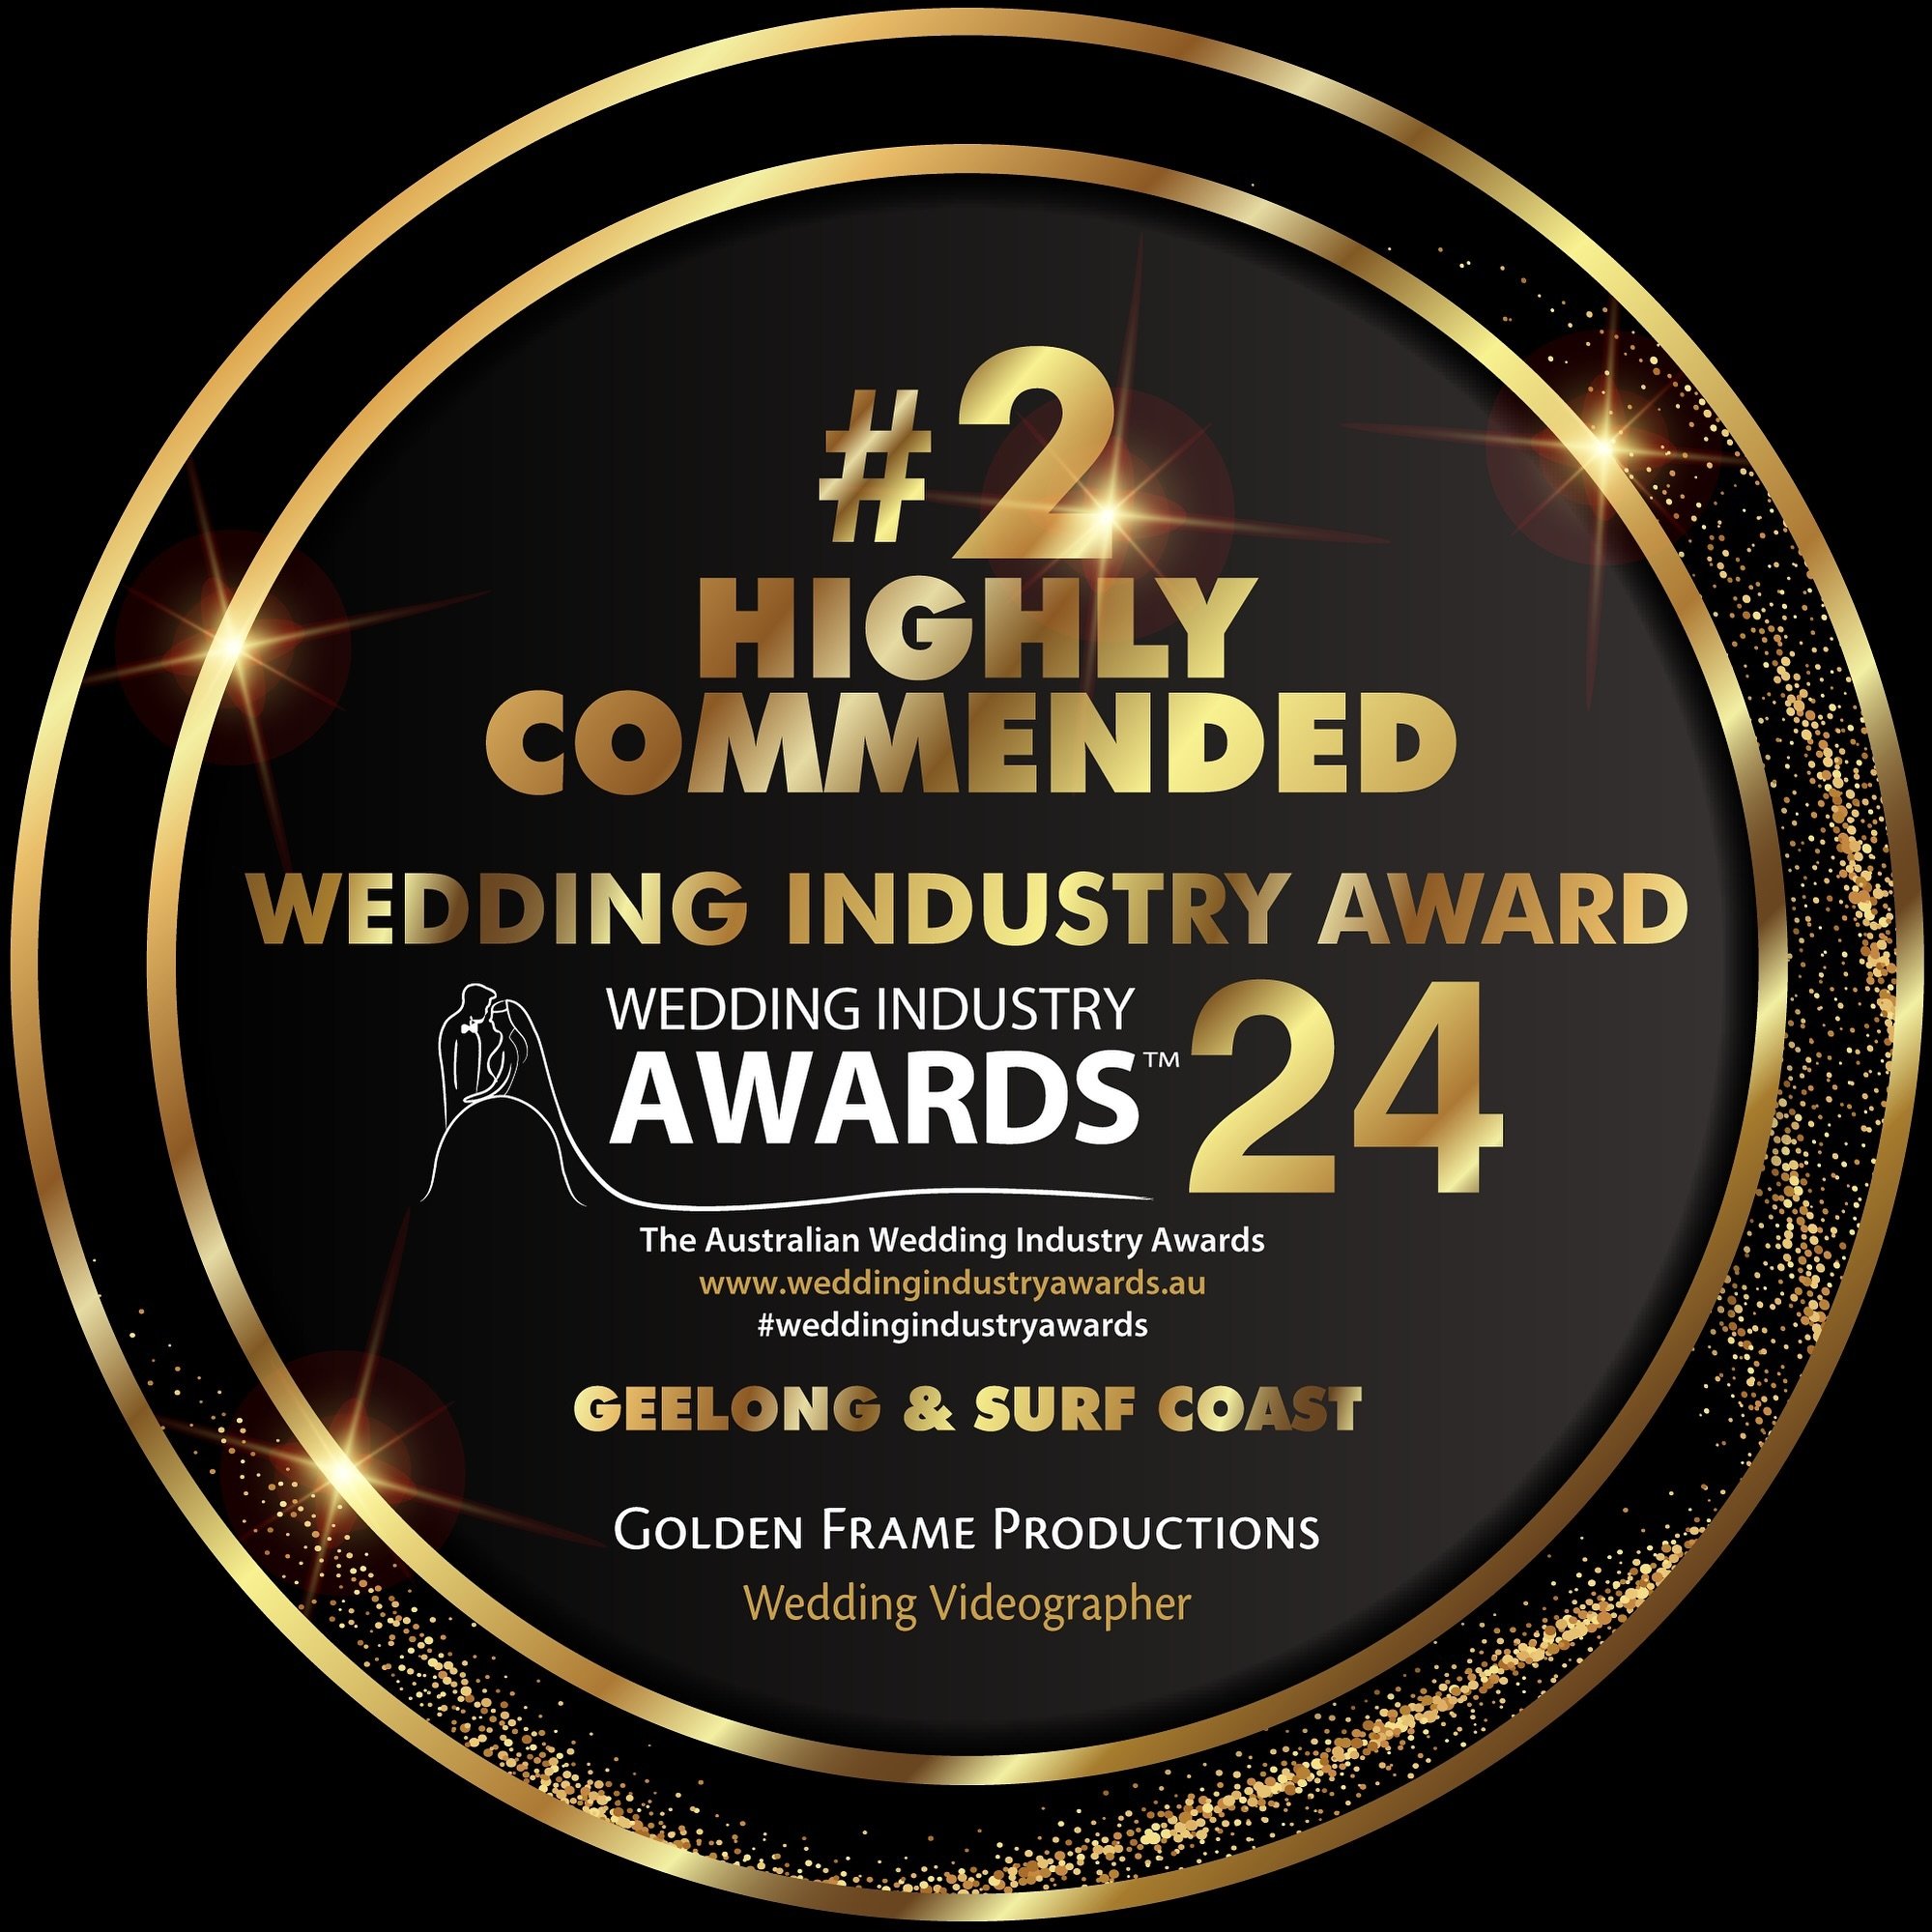 We were already over the moon to be a finalist in the 2024 Wedding Industry Award - Wedding Videographer category (Geelong &amp; Surf Coast Region) 🏆 😃 then tonight we won the #2 Highly Commended Award! 🥳

YAY!

Thank you to the @weddingindustryaw